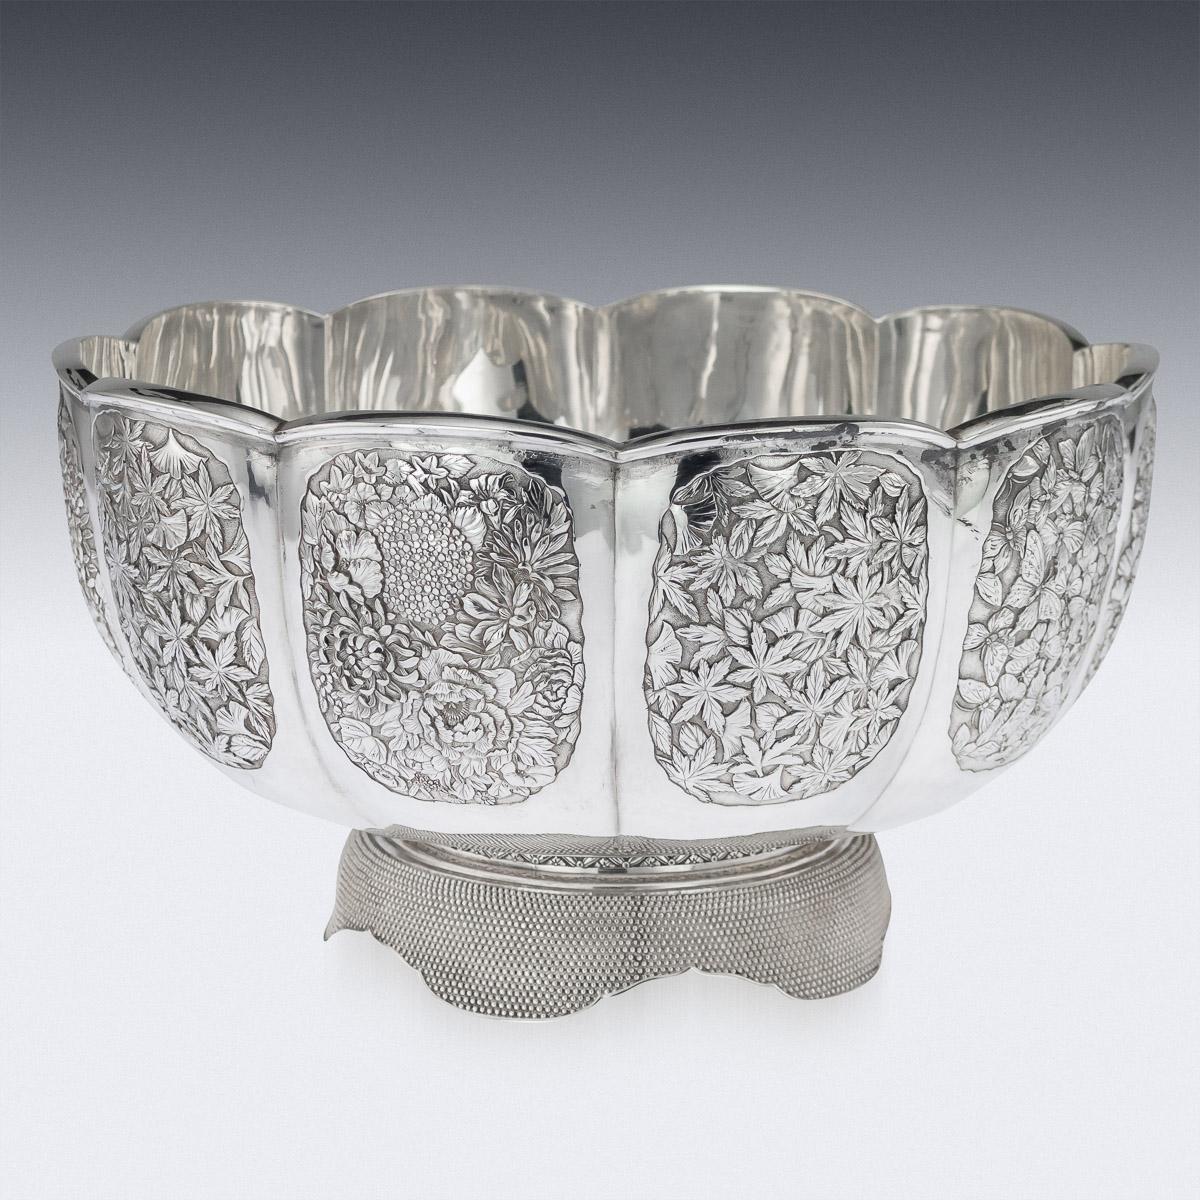 Antique early 20th century Japanese Meiji period solid silver bowl, double walled, ten panels densely chased with blossoming chrysanthemums, Japanese maple leaves and butterflies on matted hand hammered ground, shaped floral rim and standing on a